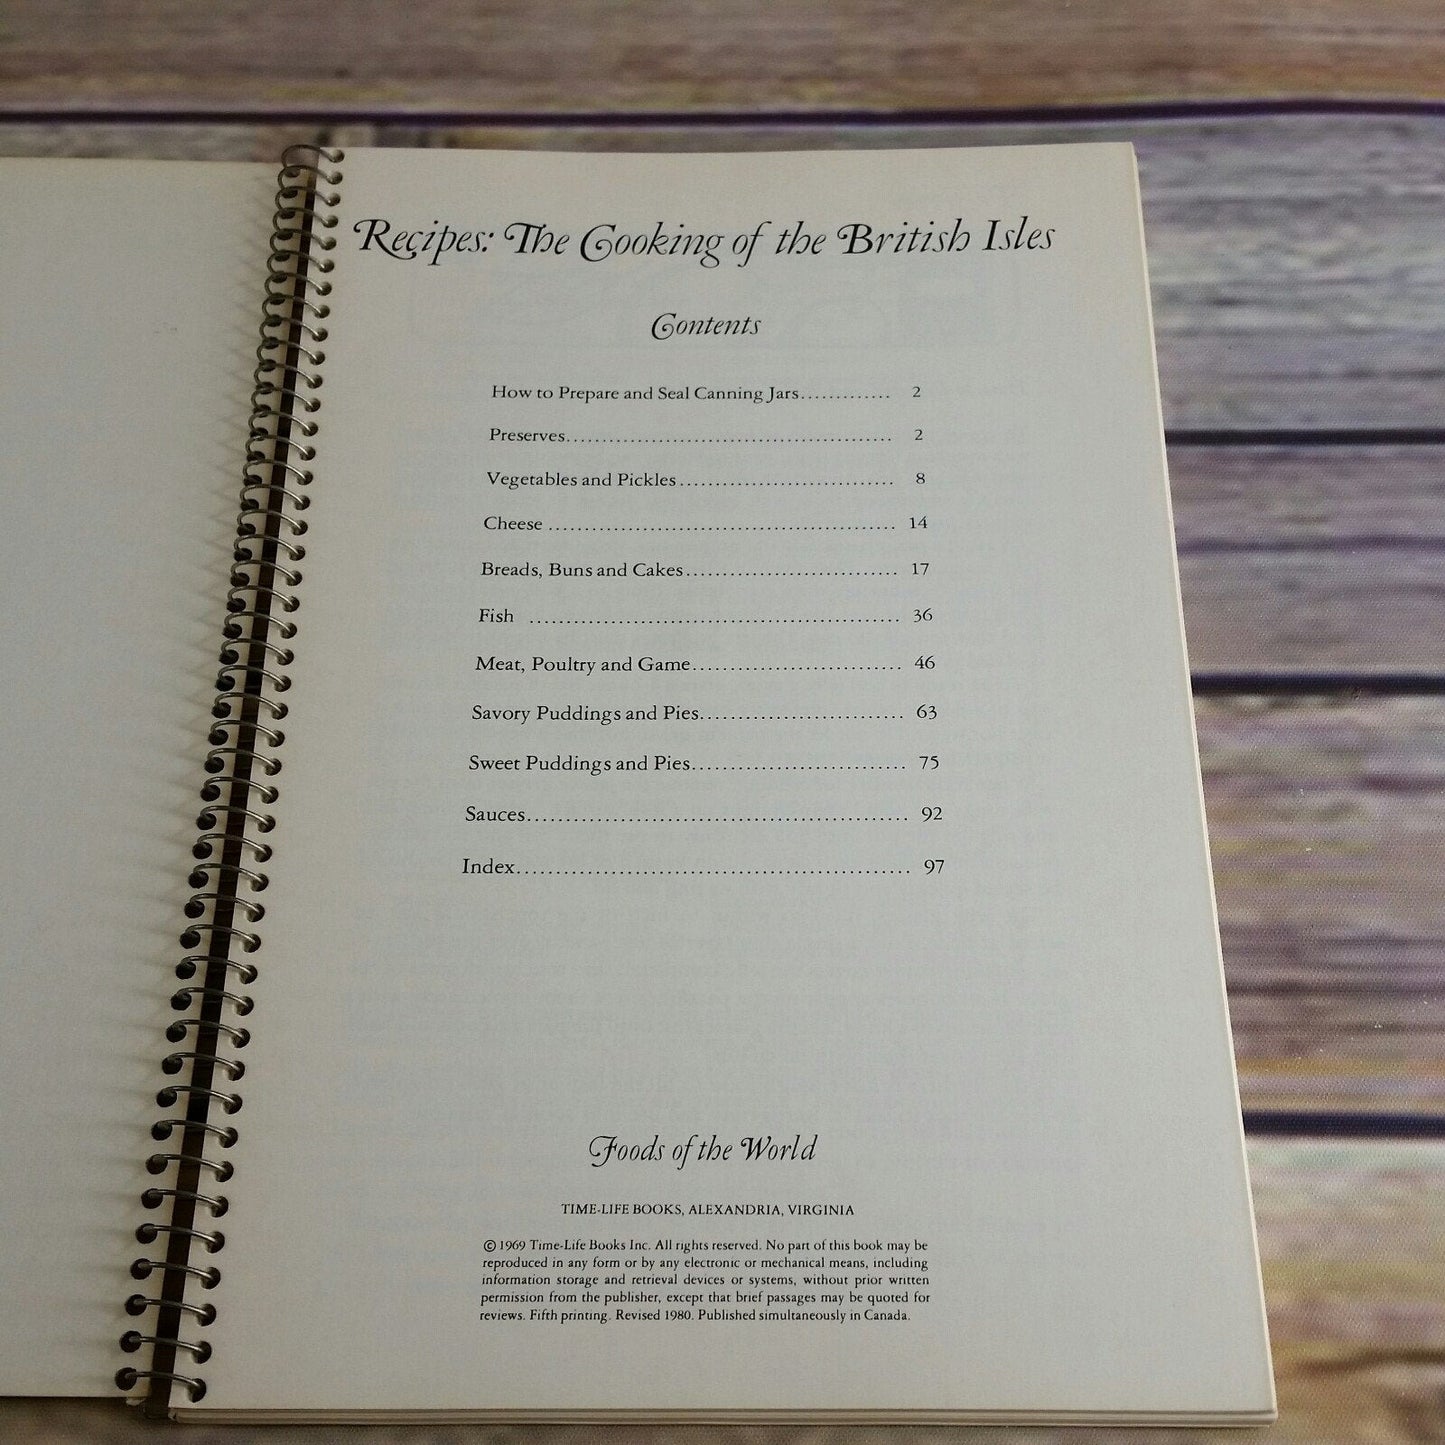 Vtg British Cookbook The Cooking of the British Isles Time Life Books Foods of the World 1969 Spiral Bound Great Britain Islands